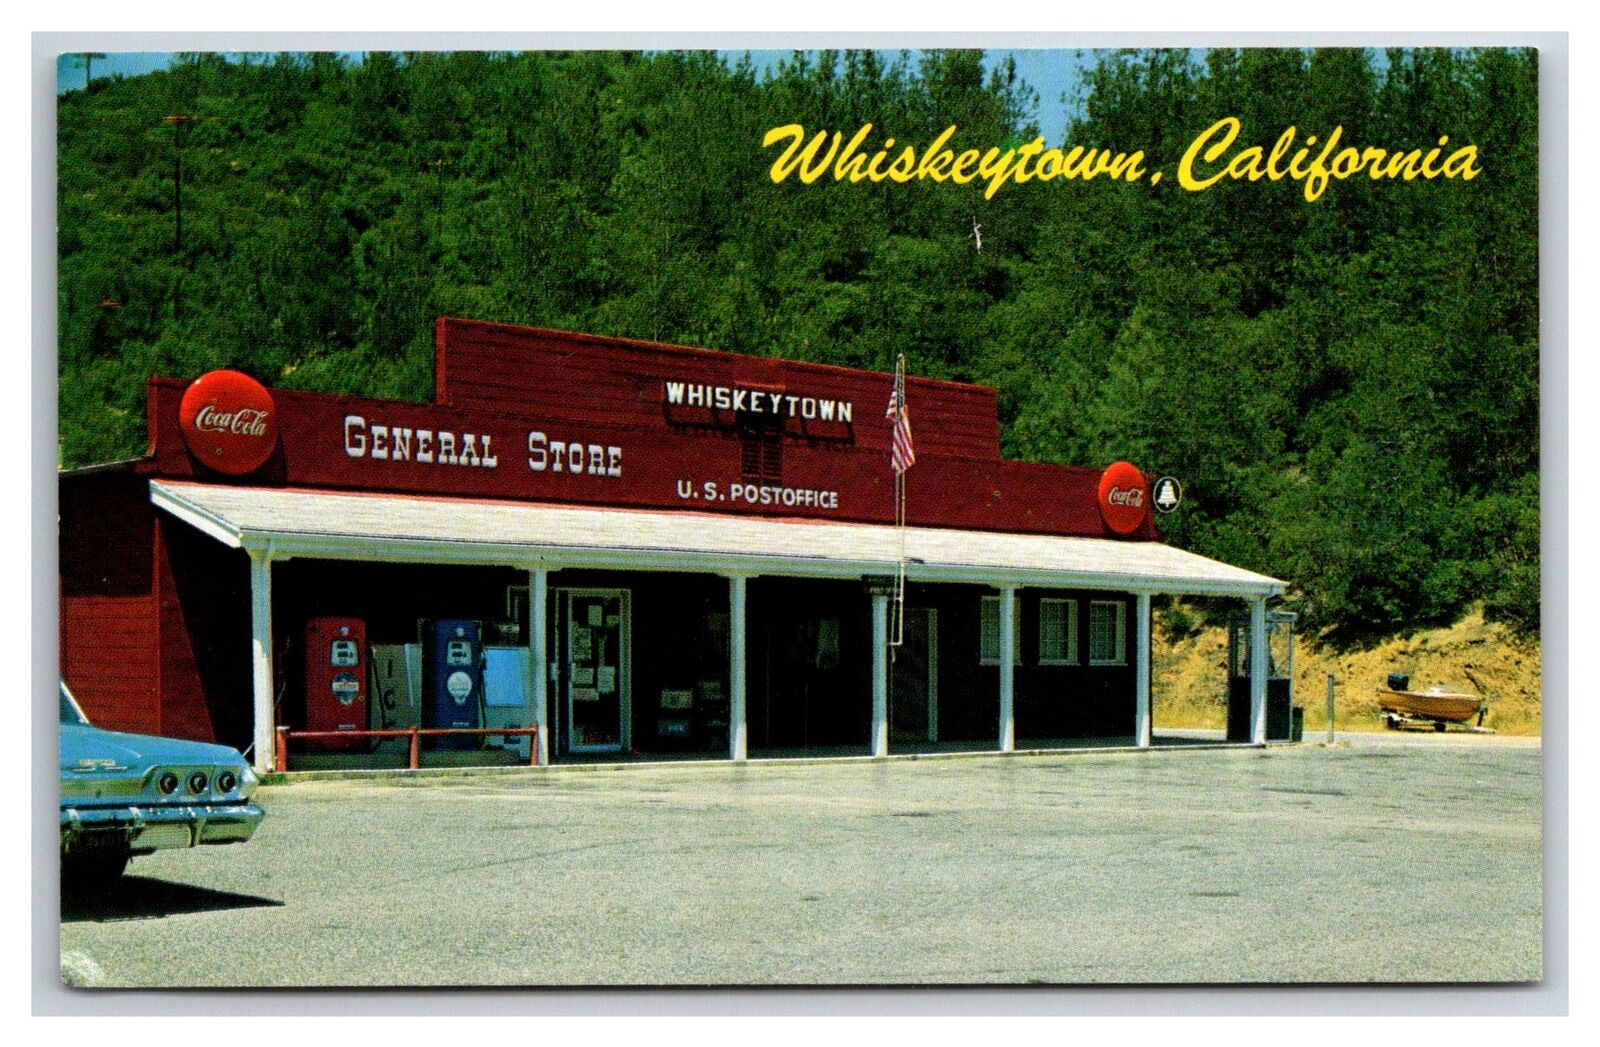 Whiskeytown California General Store, gas station  pumps Post Office Coke Sign